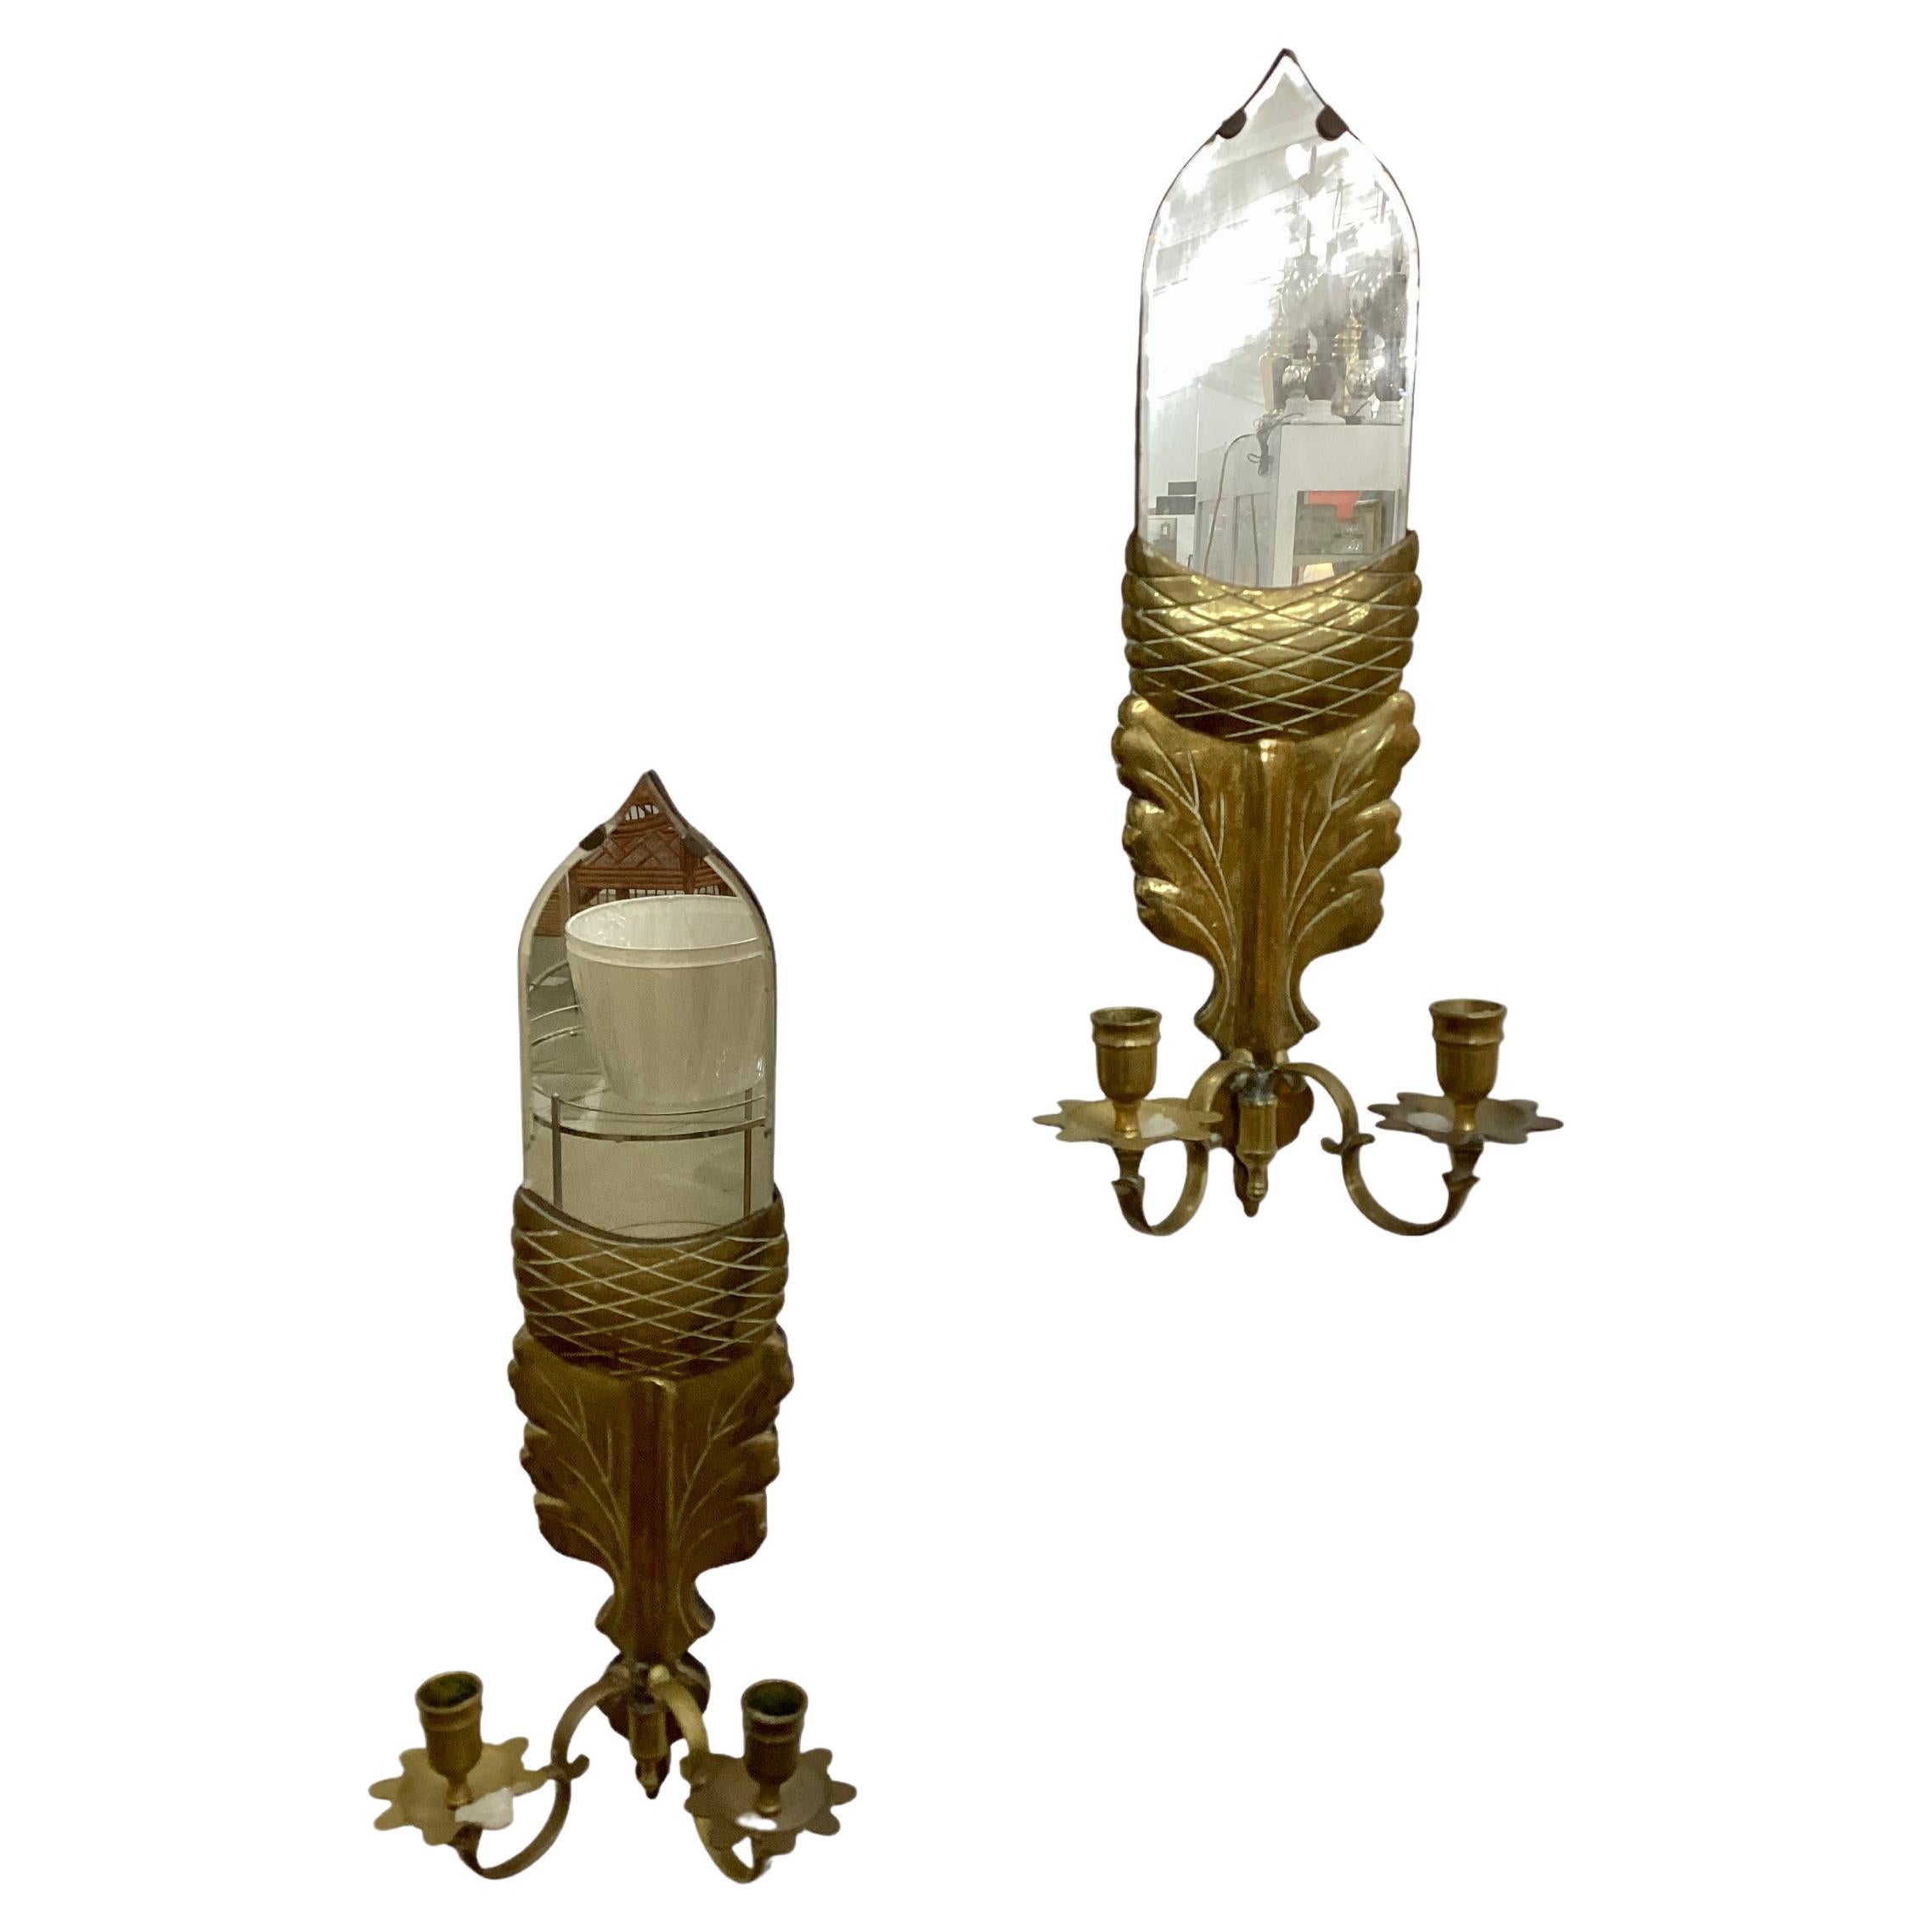 Pair of Vintage Mirror Back Sconces with Brass Acorn Motif 